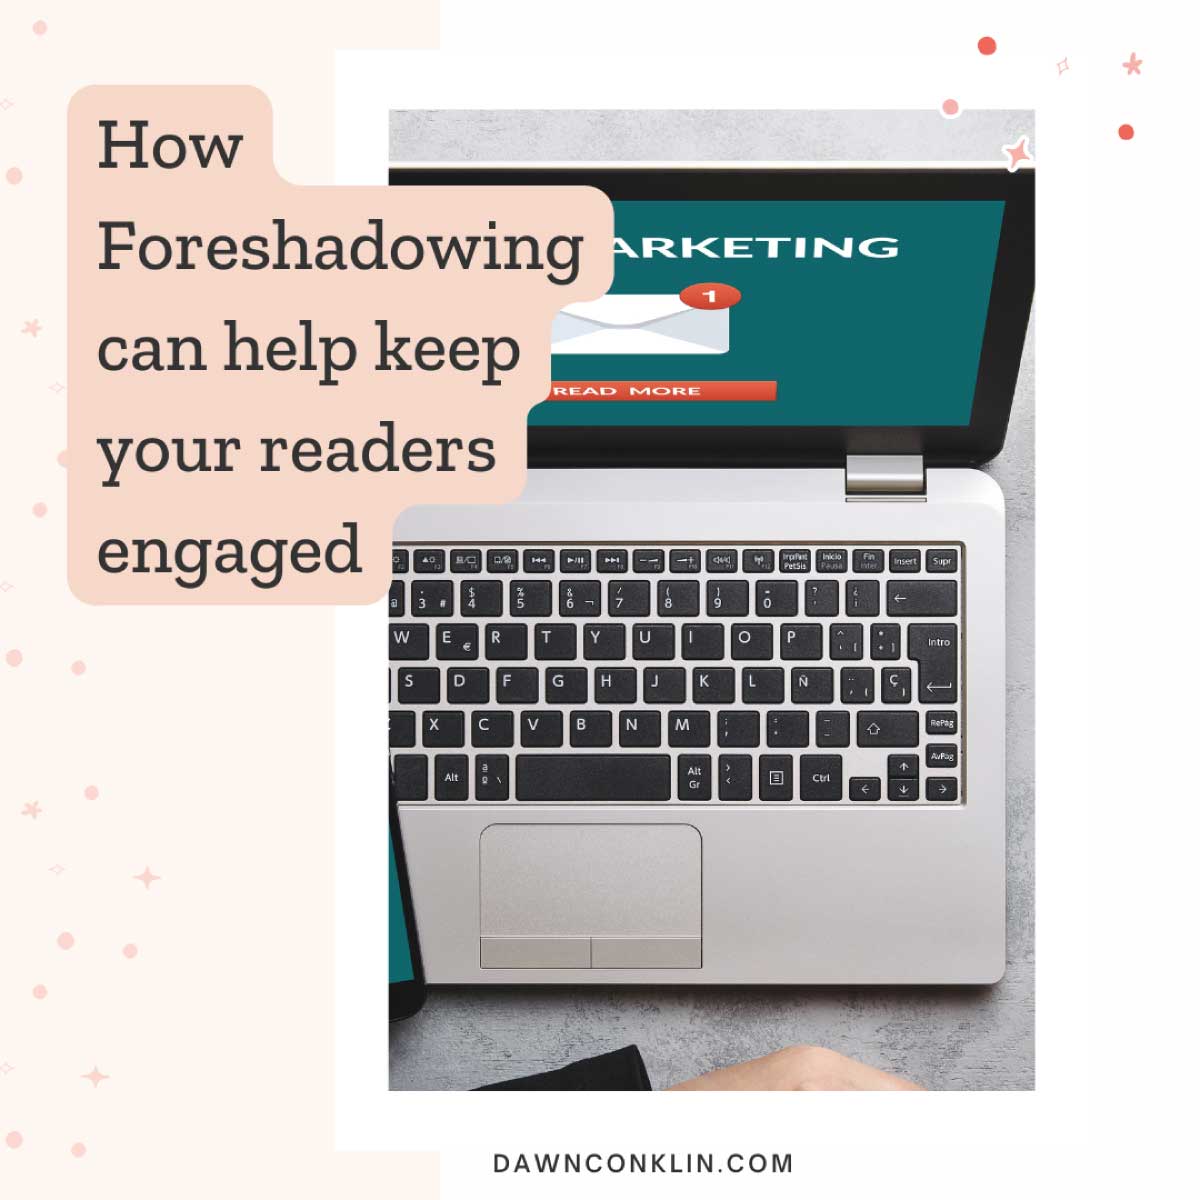 How foreshadowing can keep your readers engaged. A laptop with an email envelope on the screen.